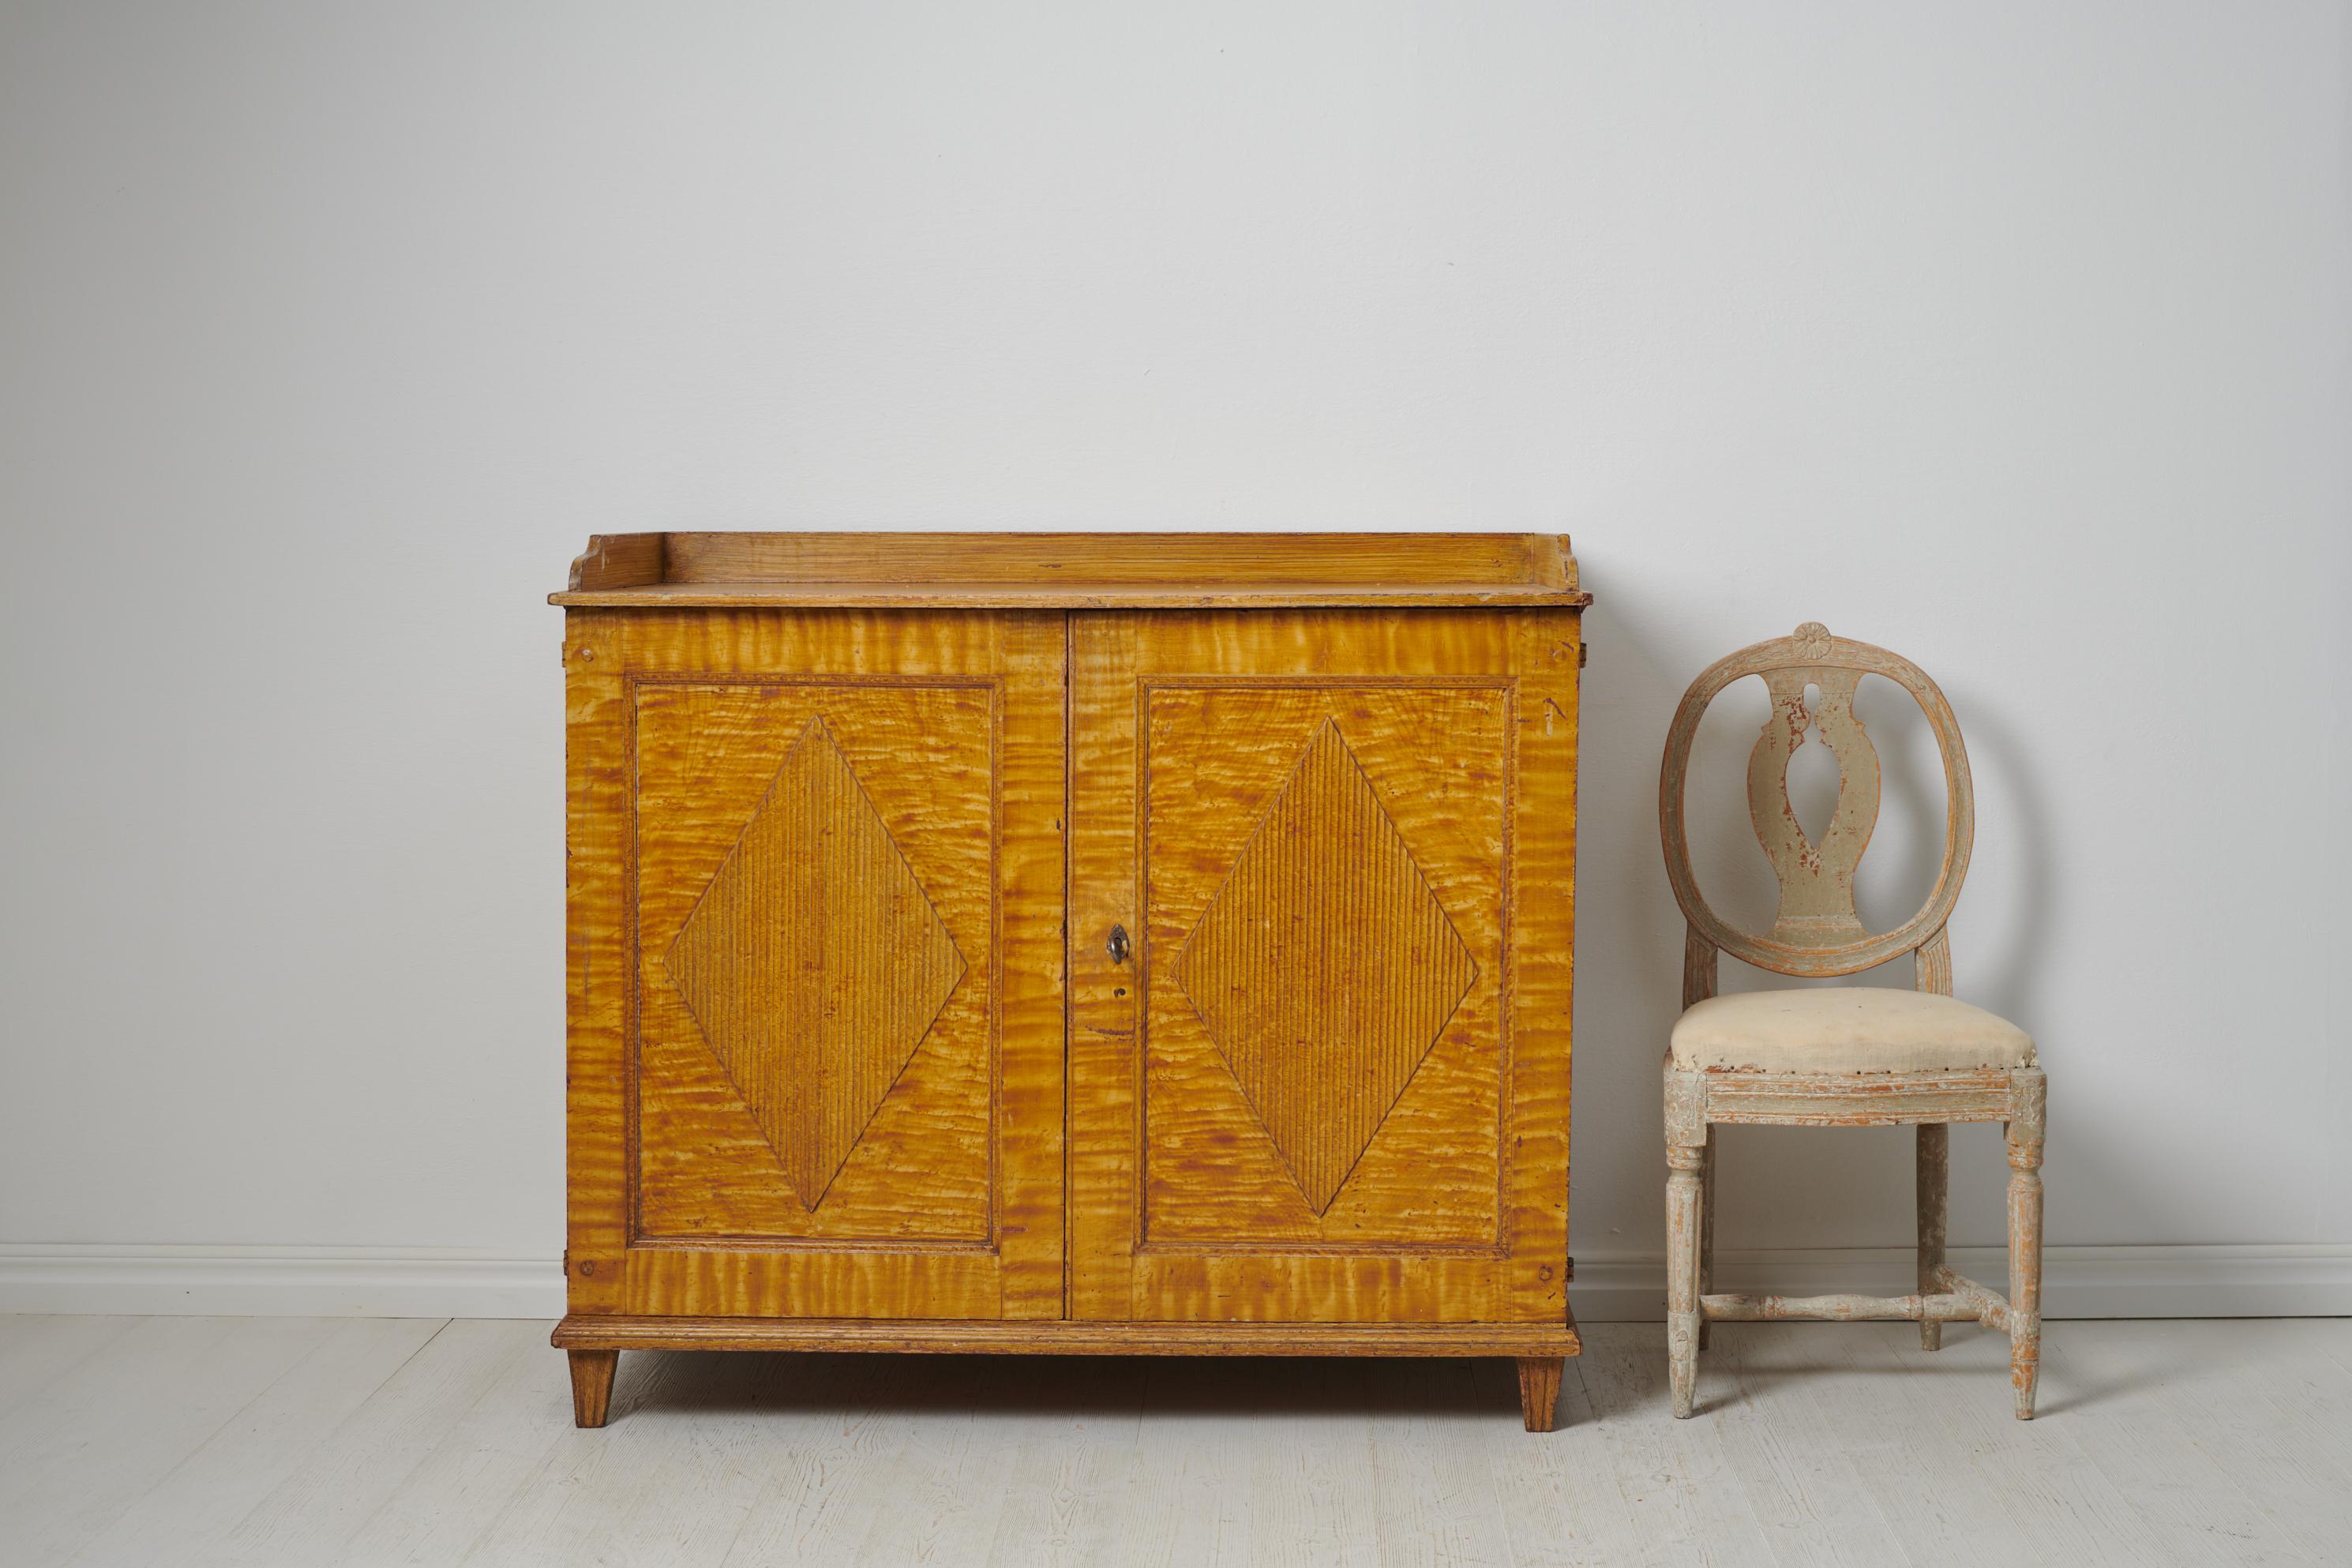 Genuine Swedish gustavian sideboard made during the first few years of the 19th century, around 1810. The sideboard is made by hand in solid Swedish pine. The double doors are decorated with fluted diamonds and the frame stands on straight tapered